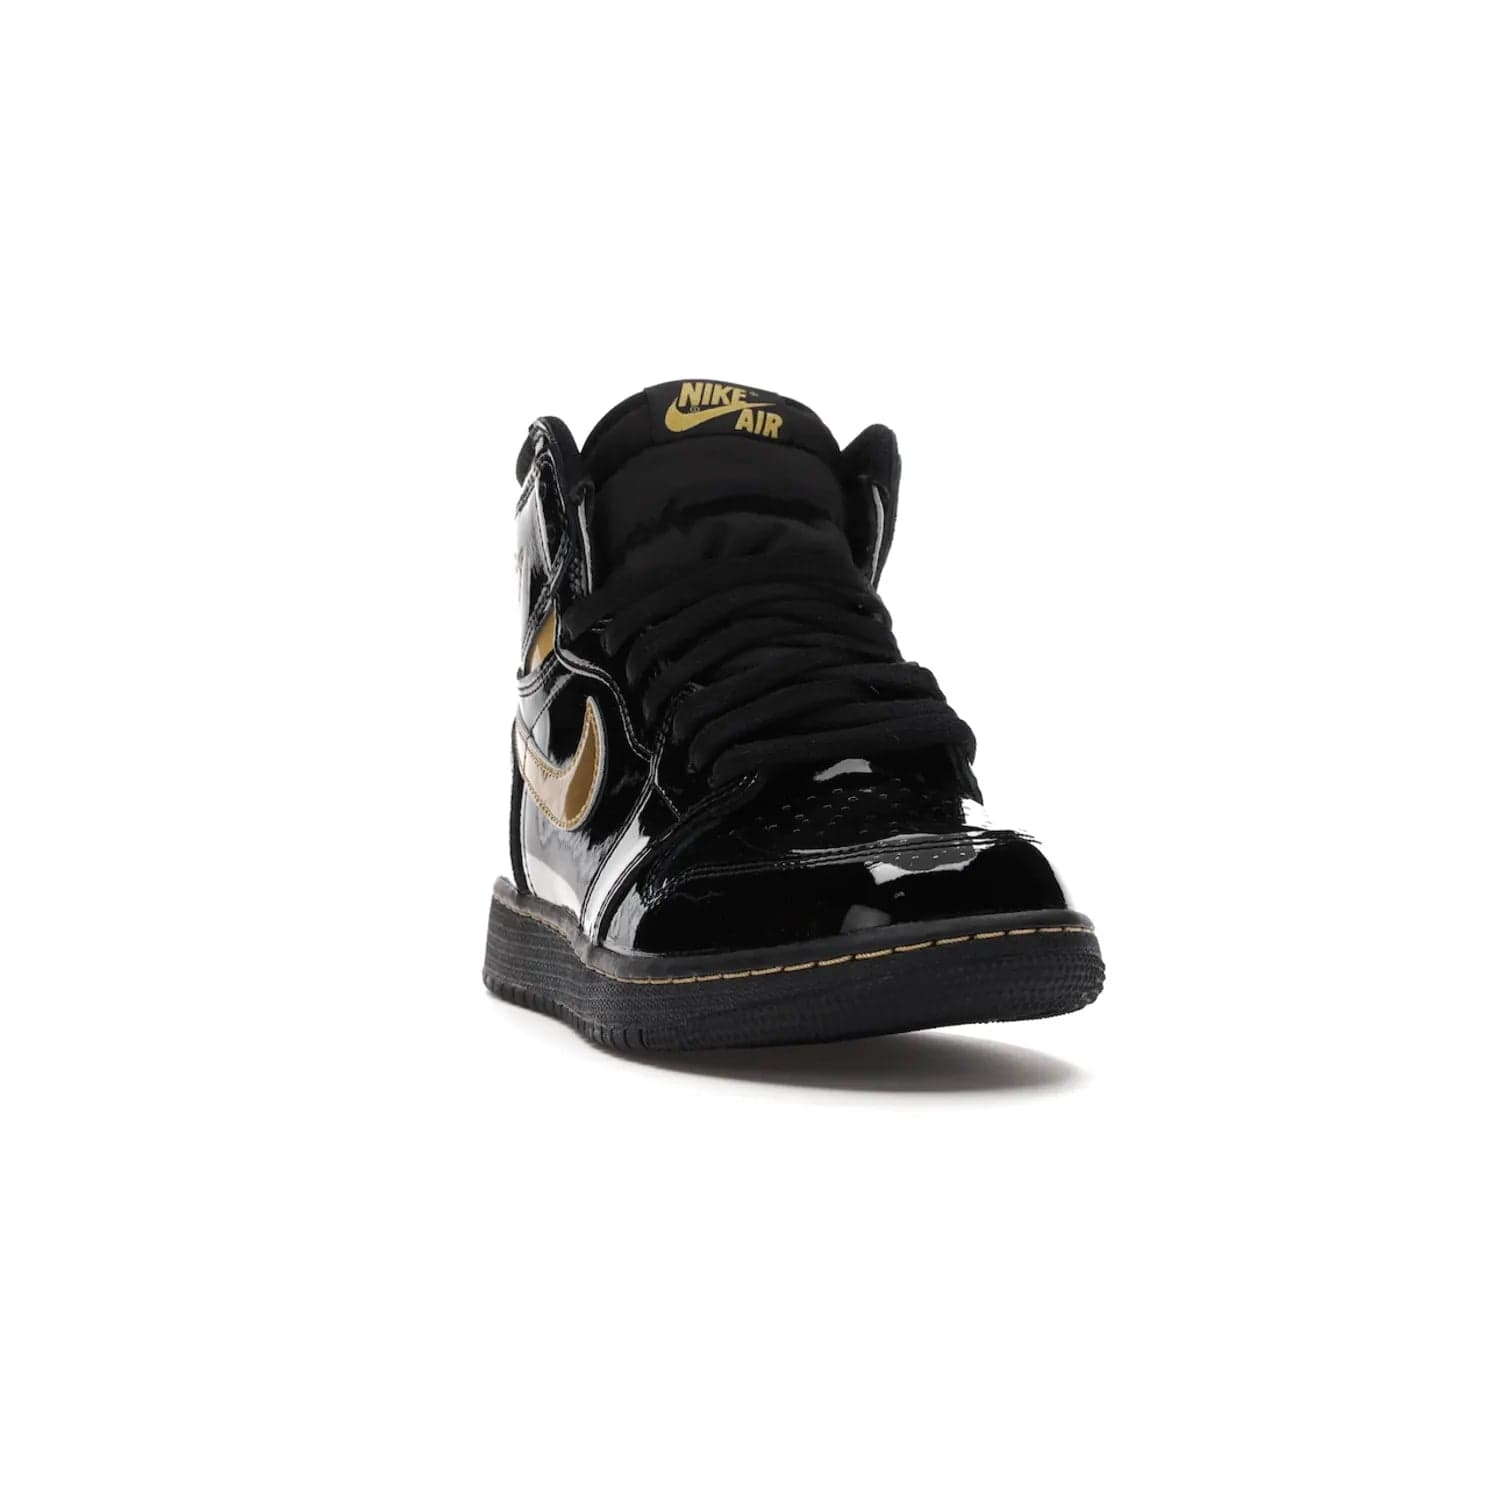 Jordan 1 Retro High Black Metallic Gold (2020) (GS) - Image 8 - Only at www.BallersClubKickz.com - Shop the Kids Air Jordan 1 Retro High in Black Metallic Gold for a stylish and comfortable sneaker kids can love. Featuring black and metallic gold patent leather uppers, metallic gold accents, and an Air sole unit for extra cushioning.